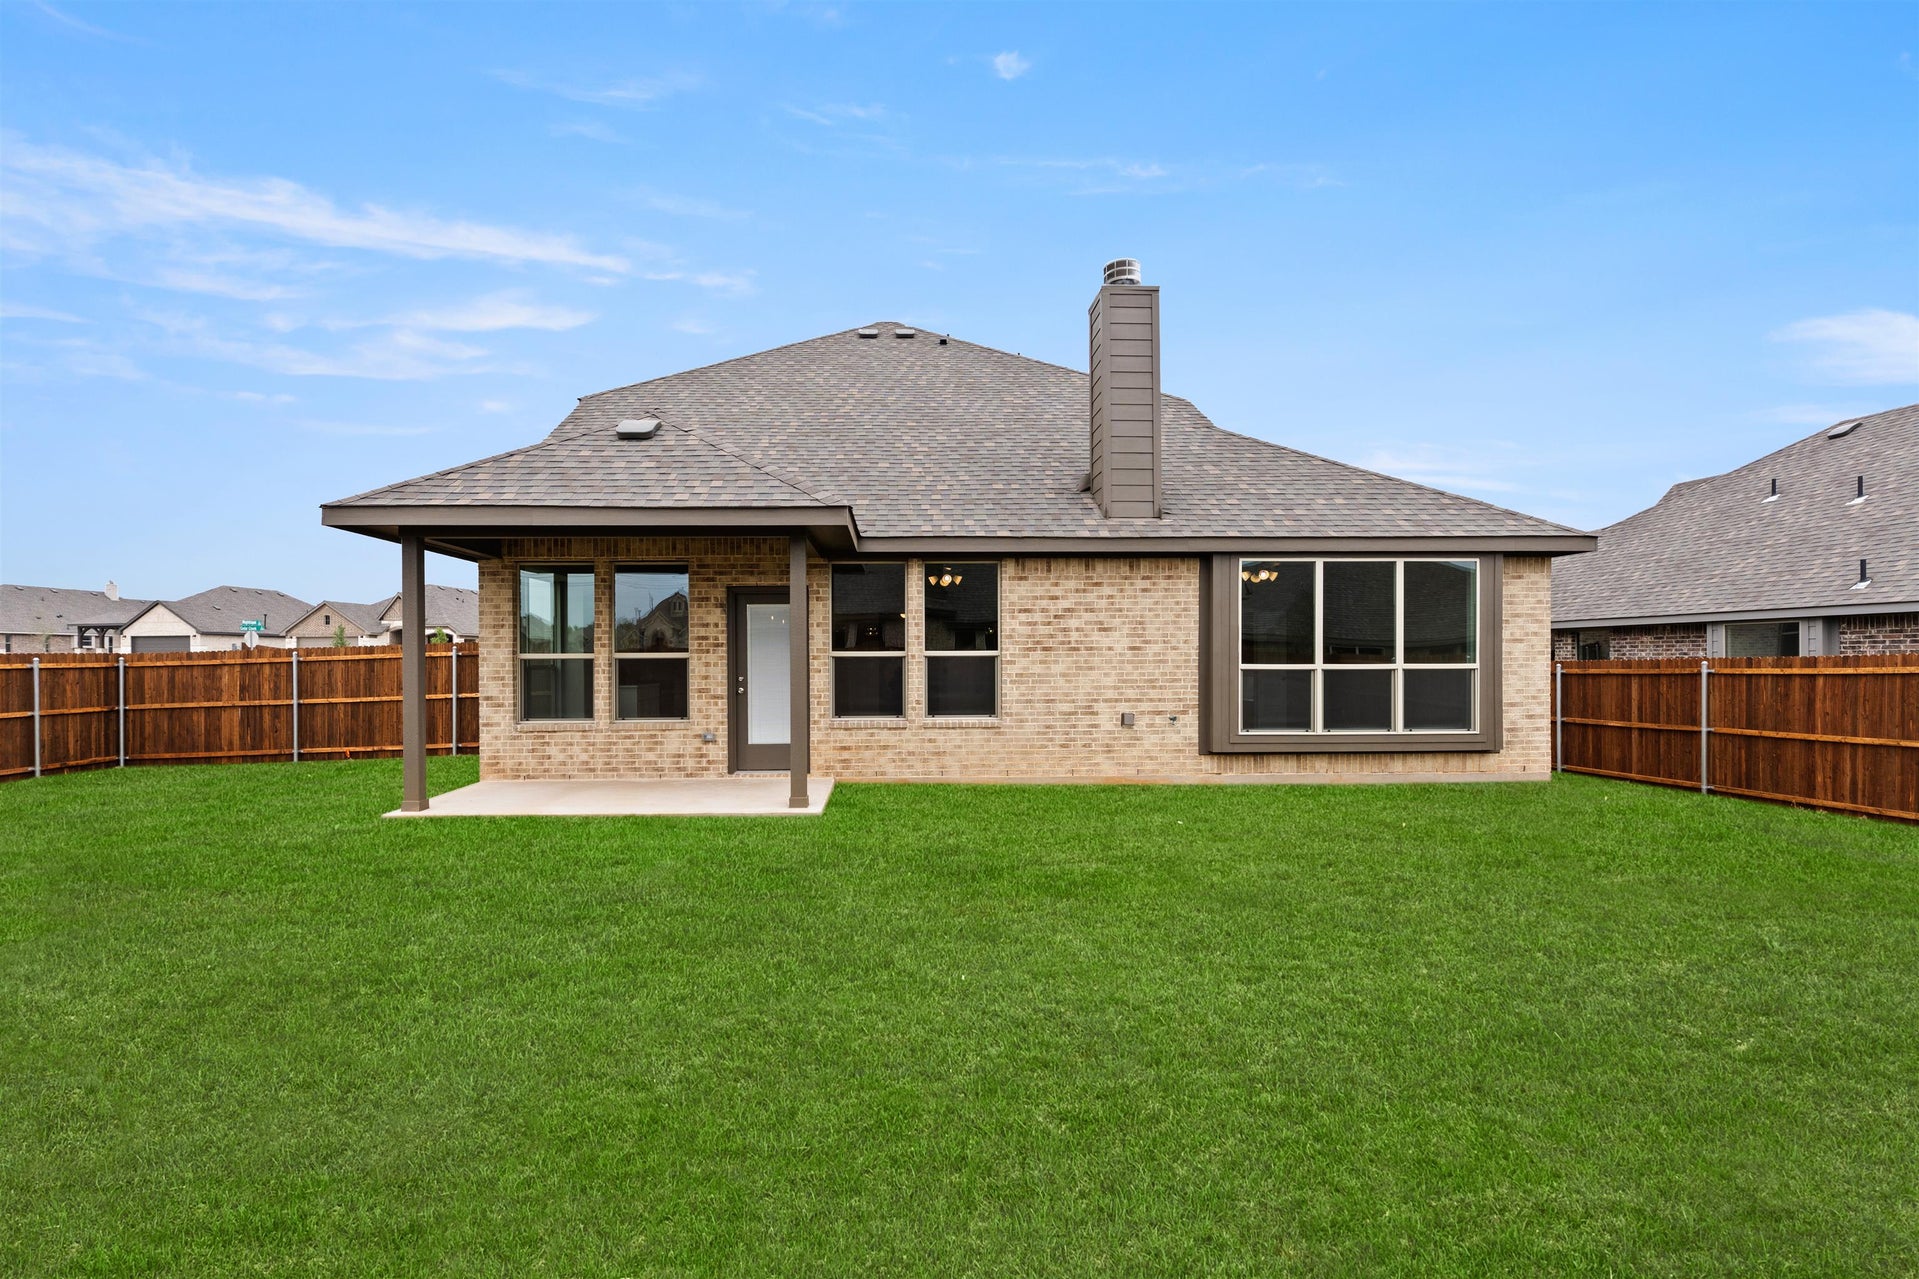 4br New Home in Crowley, TX